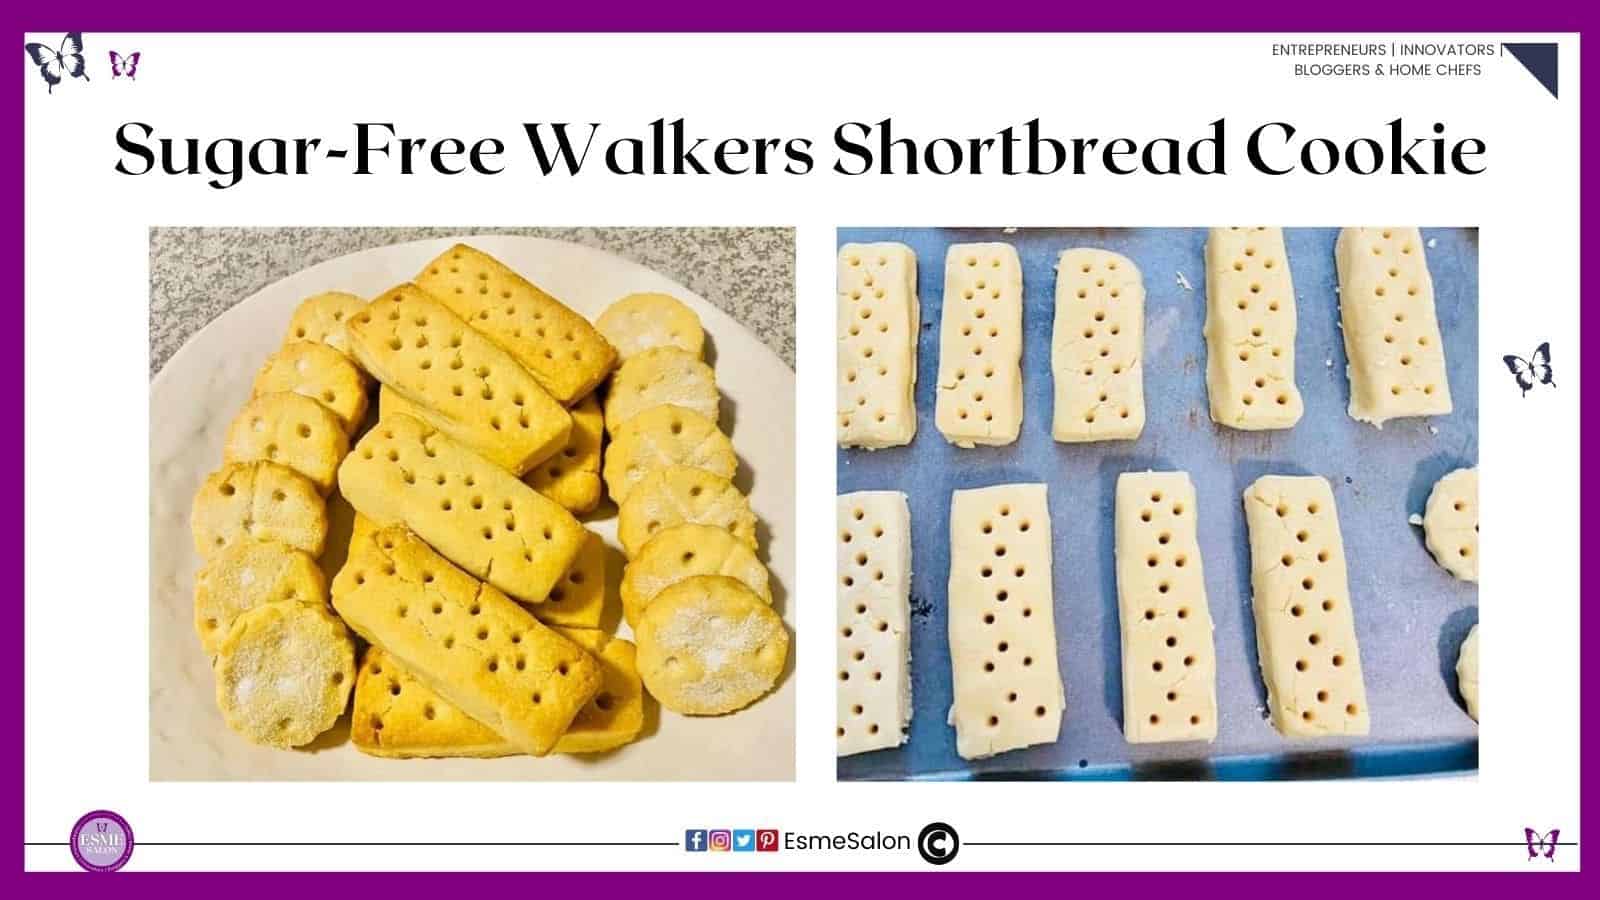 an image of baked and raw Sugar-Free Walkers Shortbread Cookies